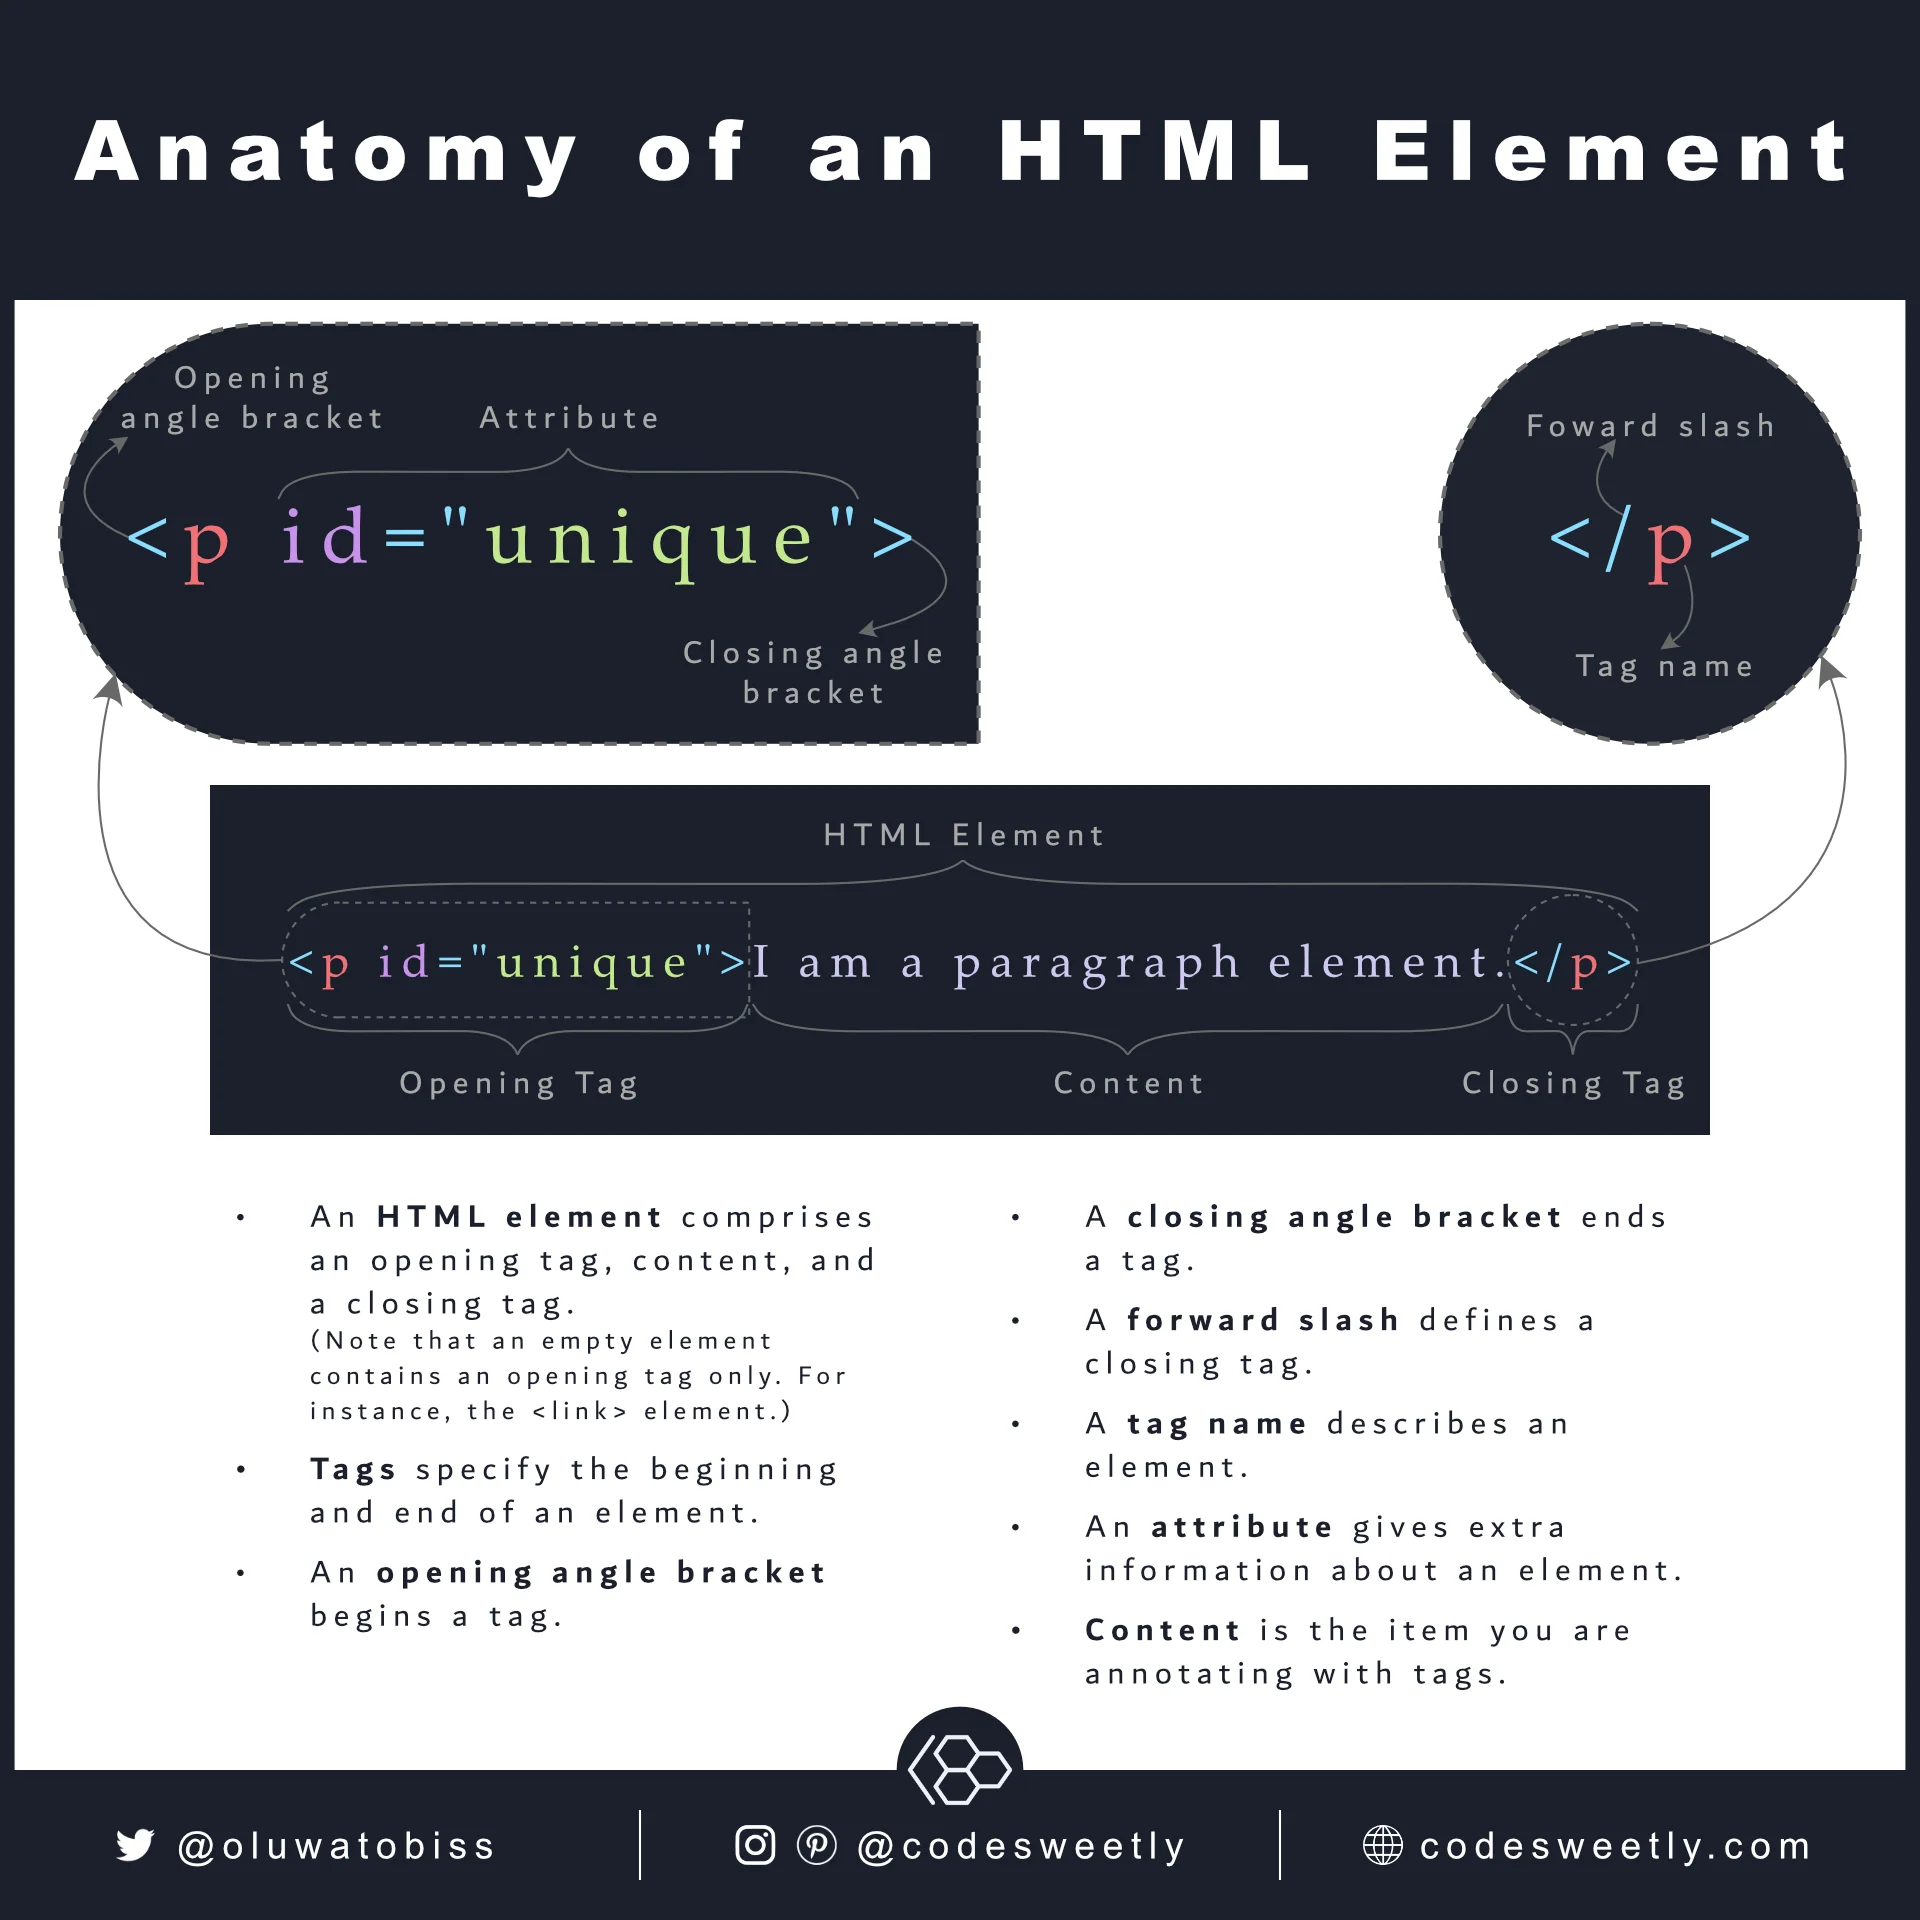 HTML element equals opening tag plus content plus closing tag